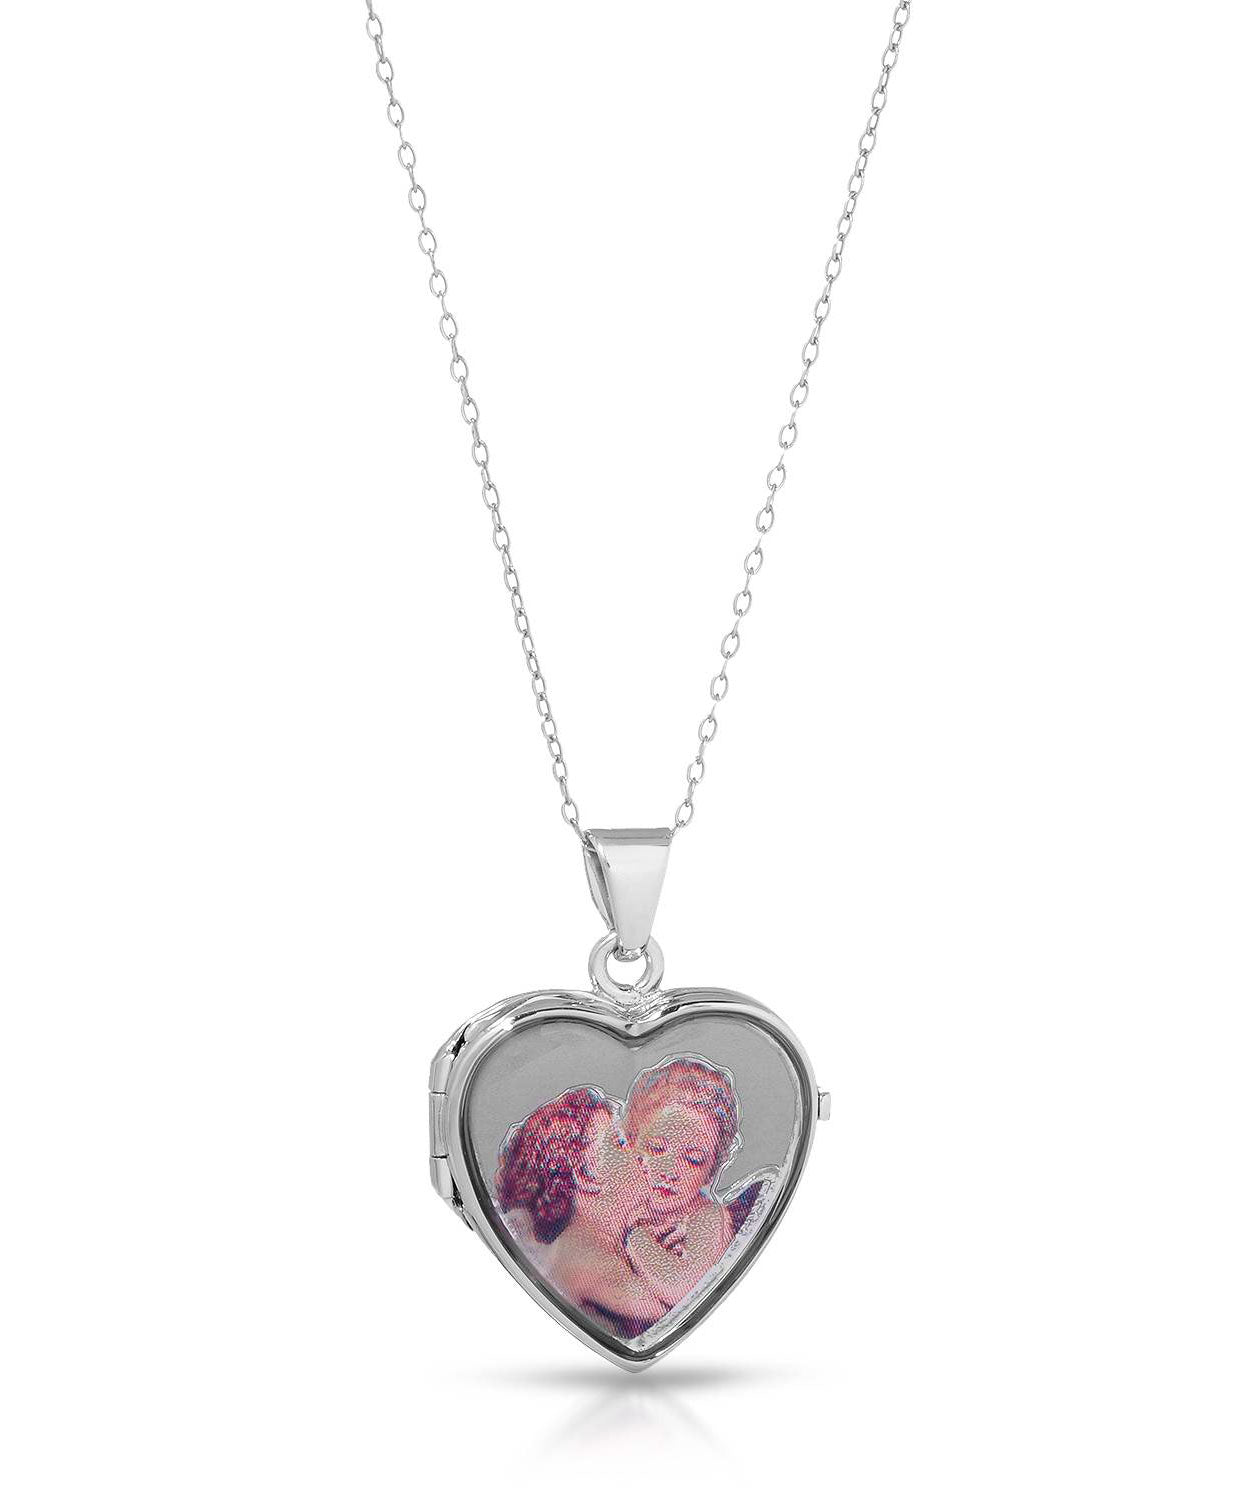 925 Sterling Silver & Enamel Heart Locket Pendant With Chain - Made in Italy View 1